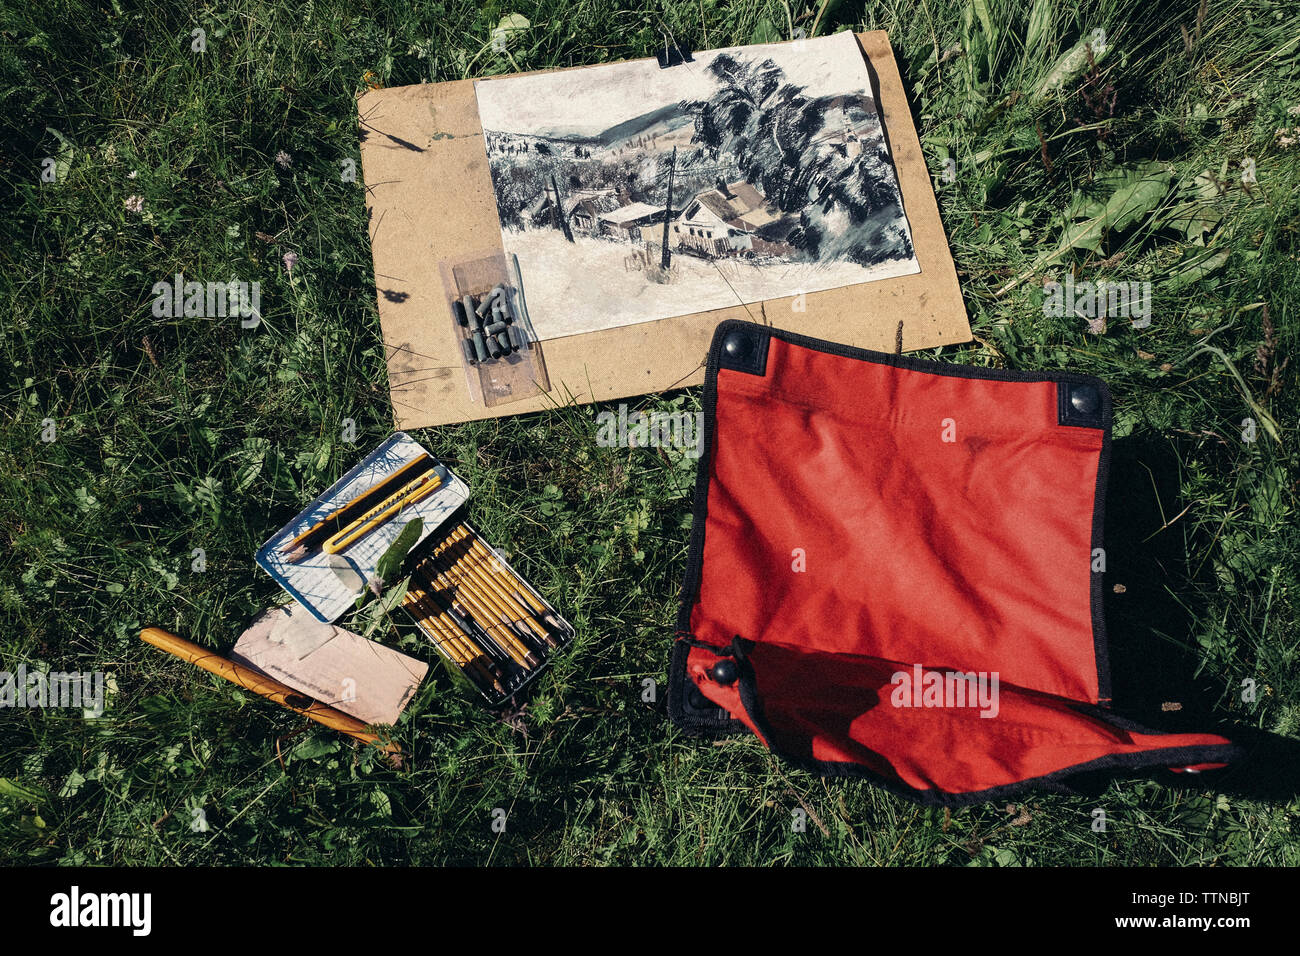 High angle view of art supplies on grassy field Stock Photo